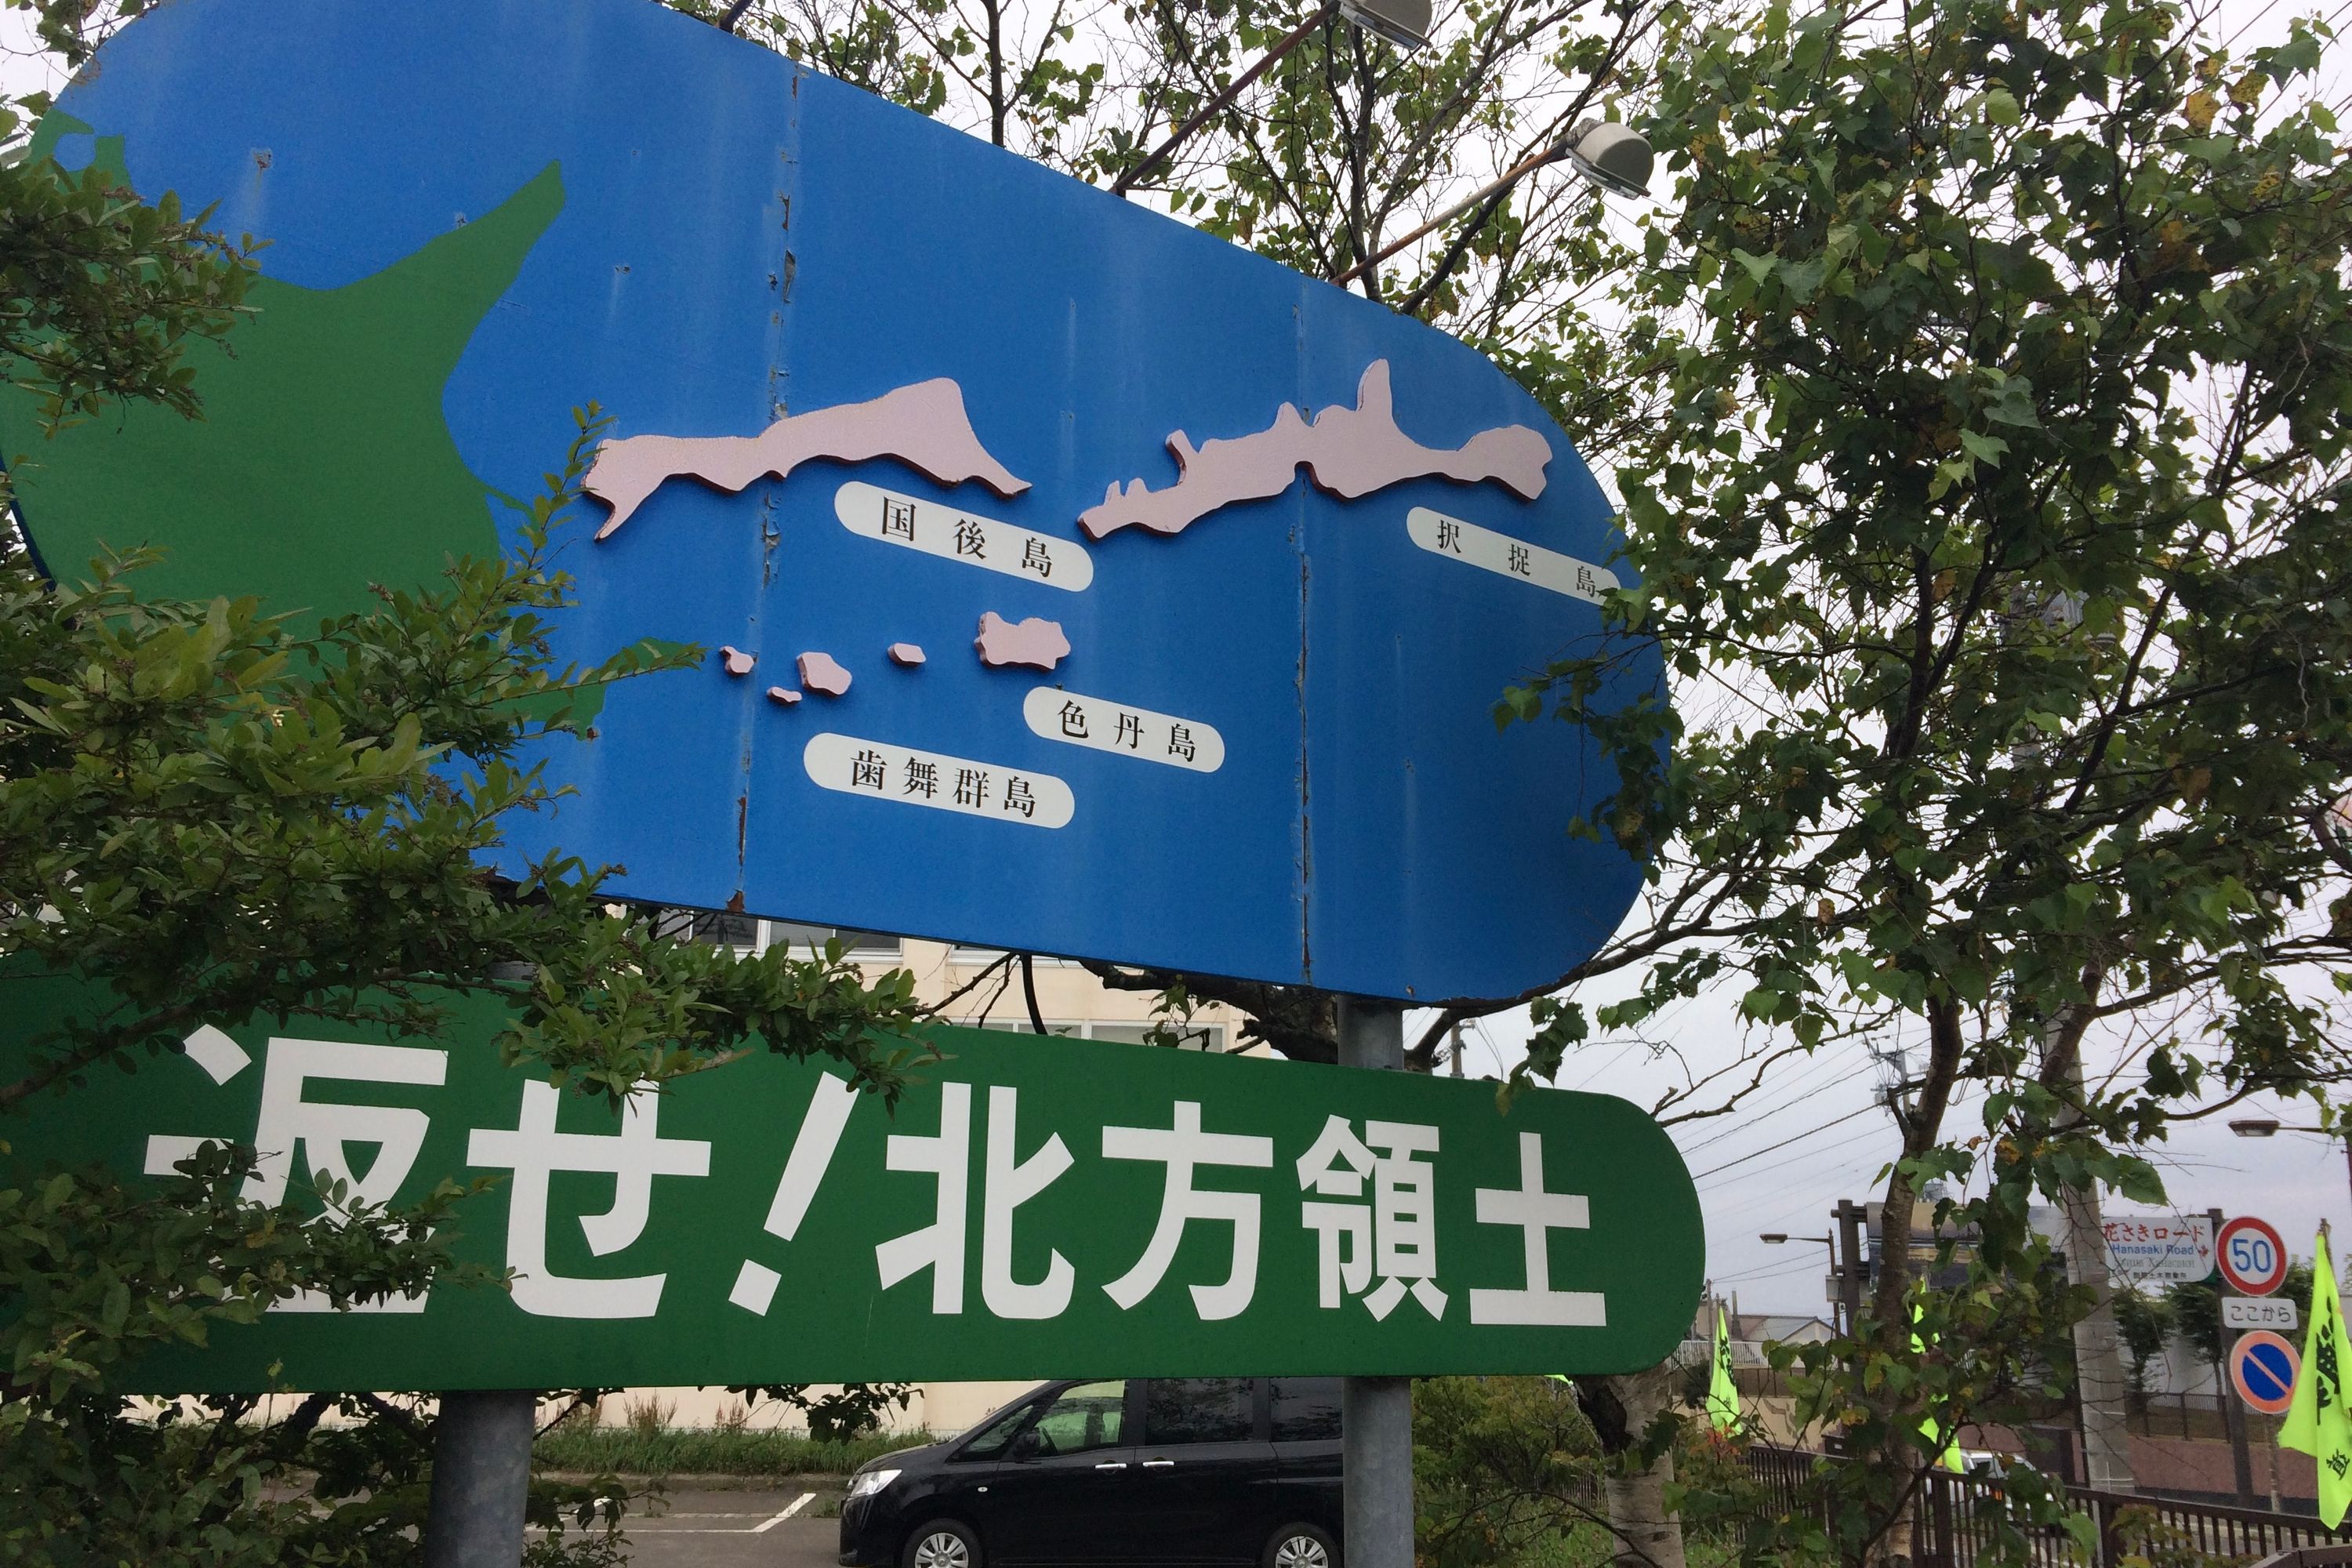 Another sign about the Kuril Islands dispute.